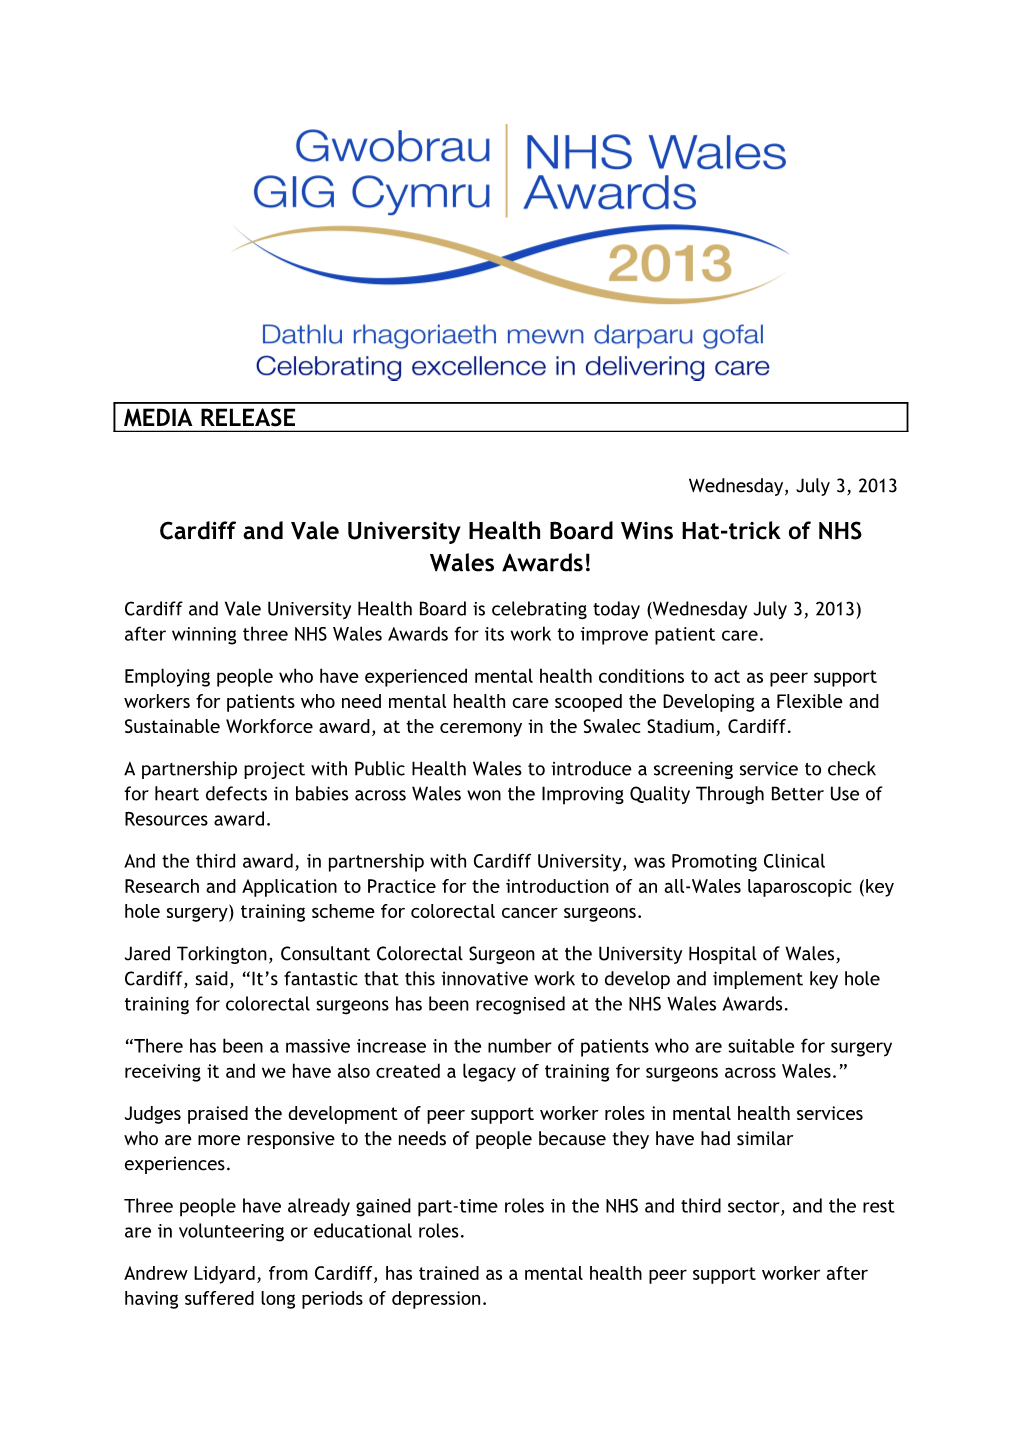 Cardiff and Vale University Health Board Winshat-Trick of NHS Wales Awards!